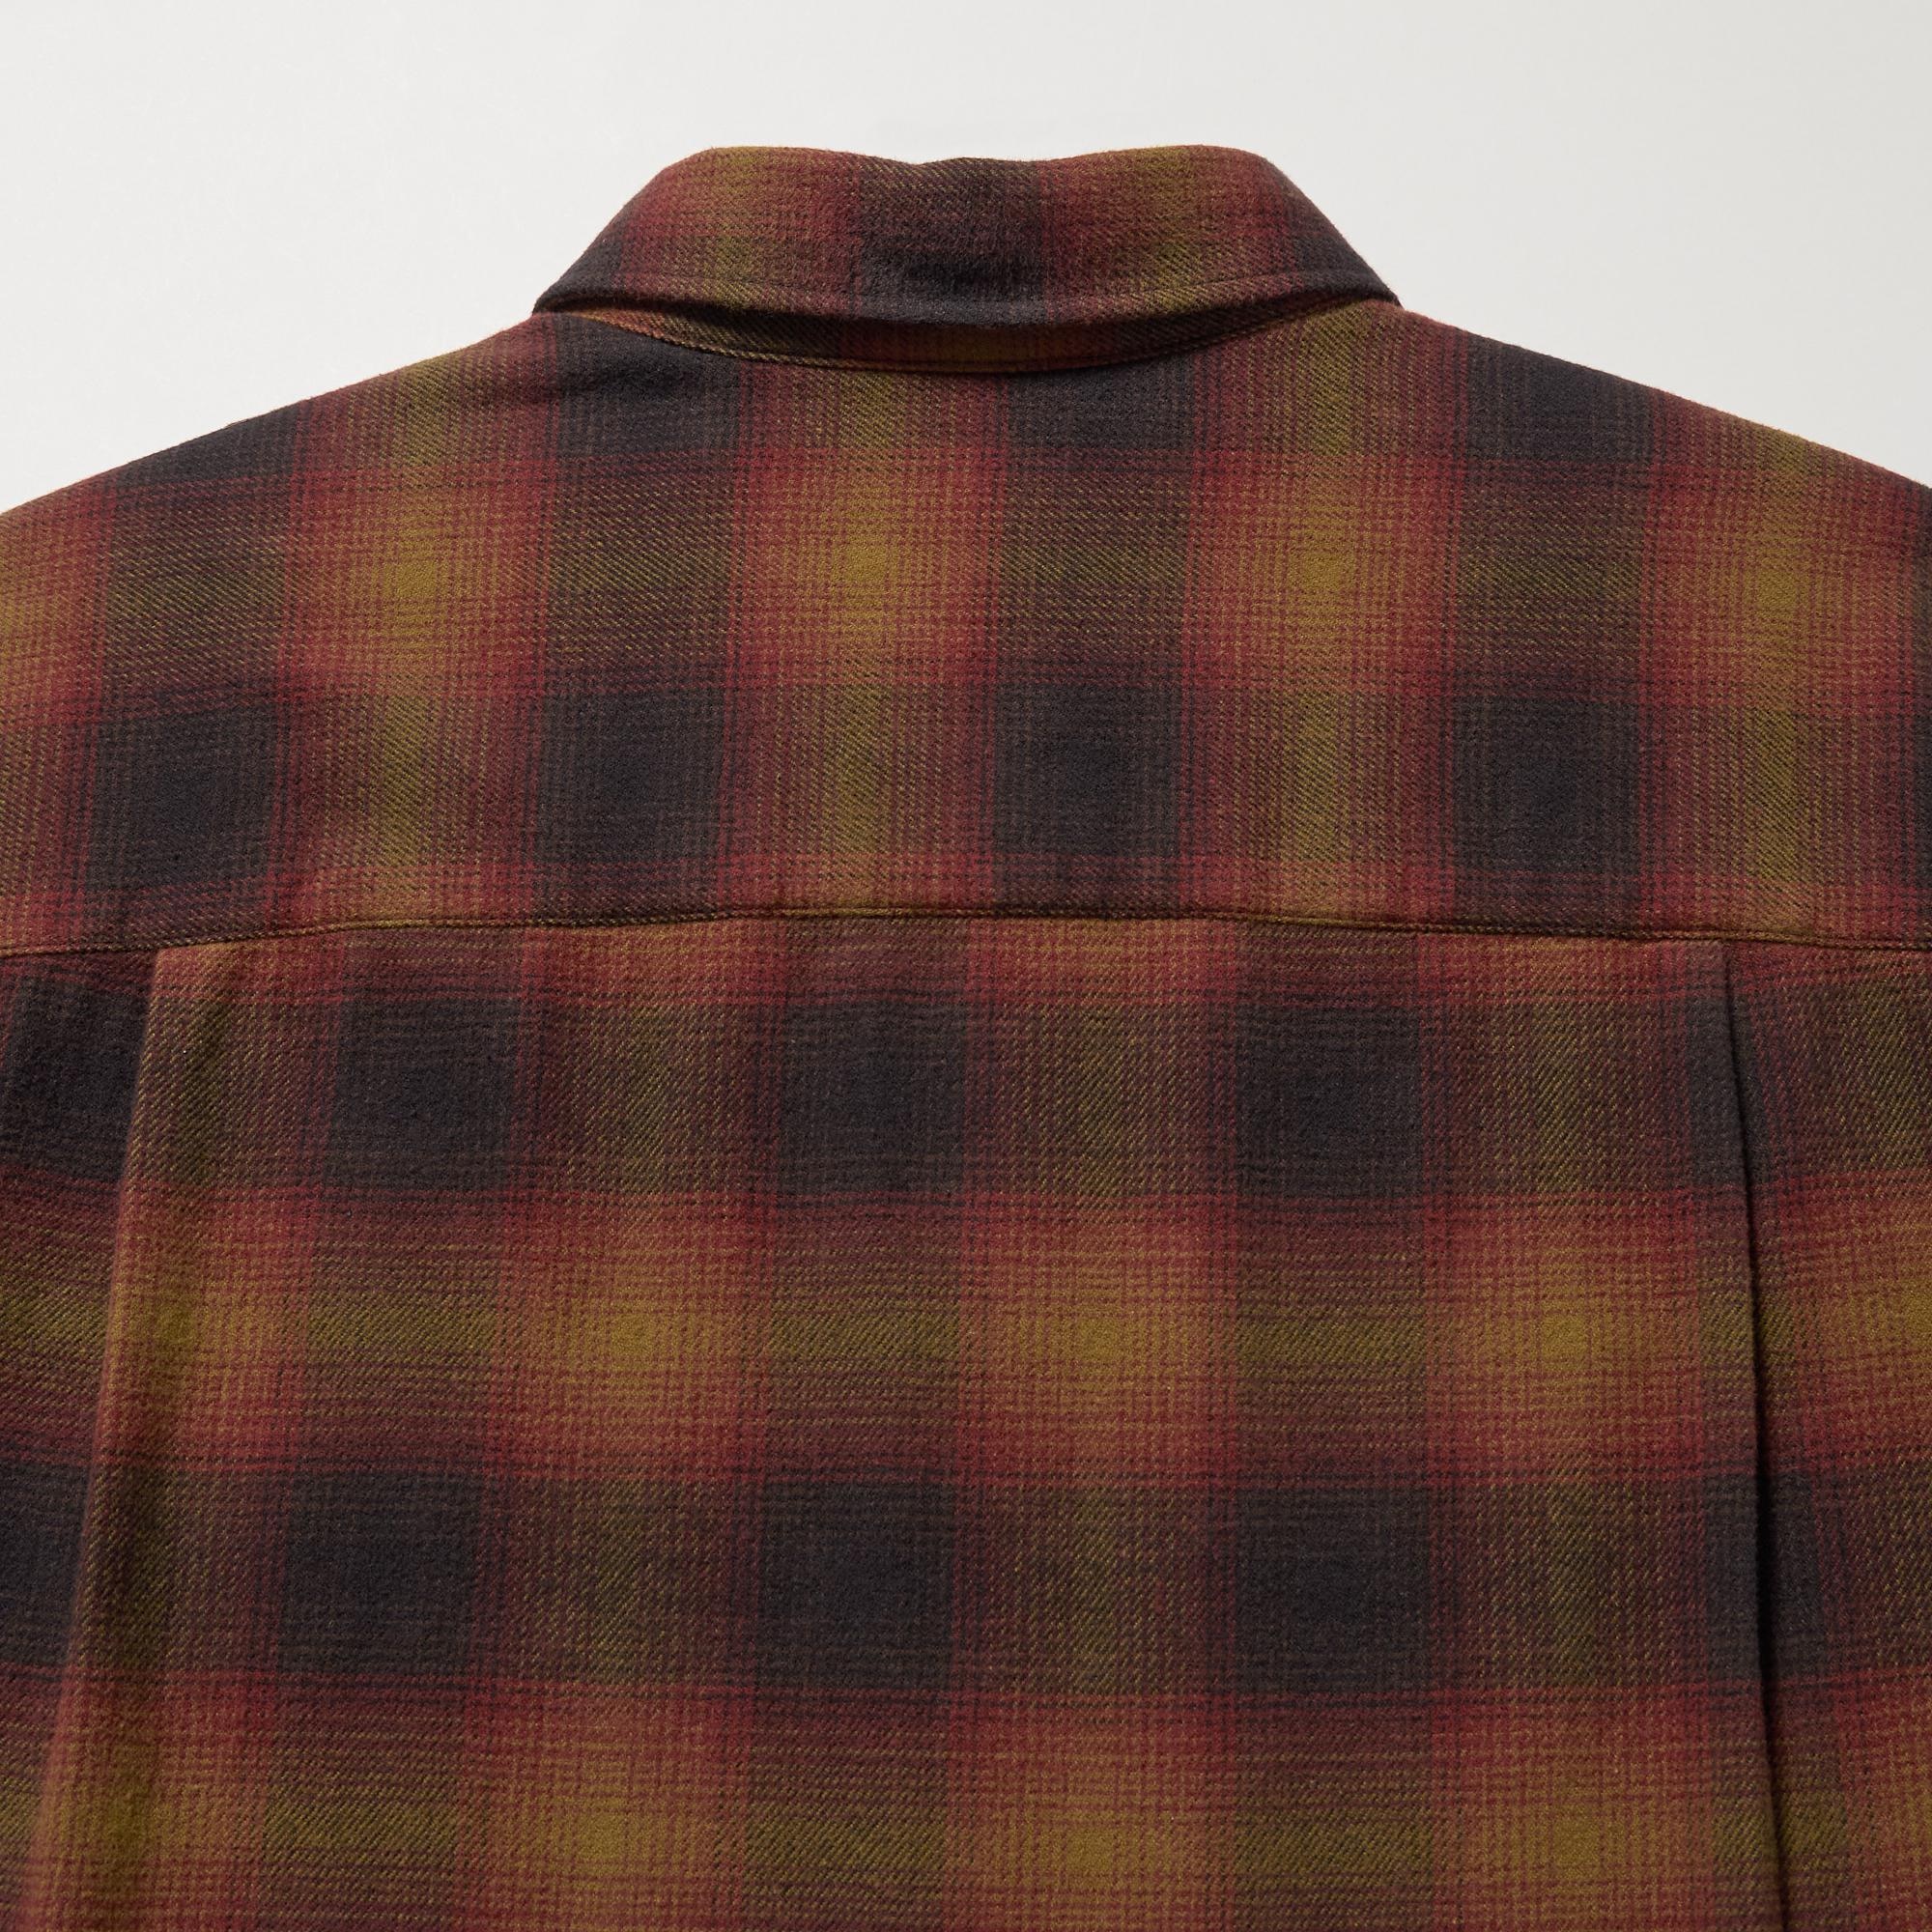 MENS FLANNEL CHECKED LONG SLEEVE SHIRT  UNIQLO VN